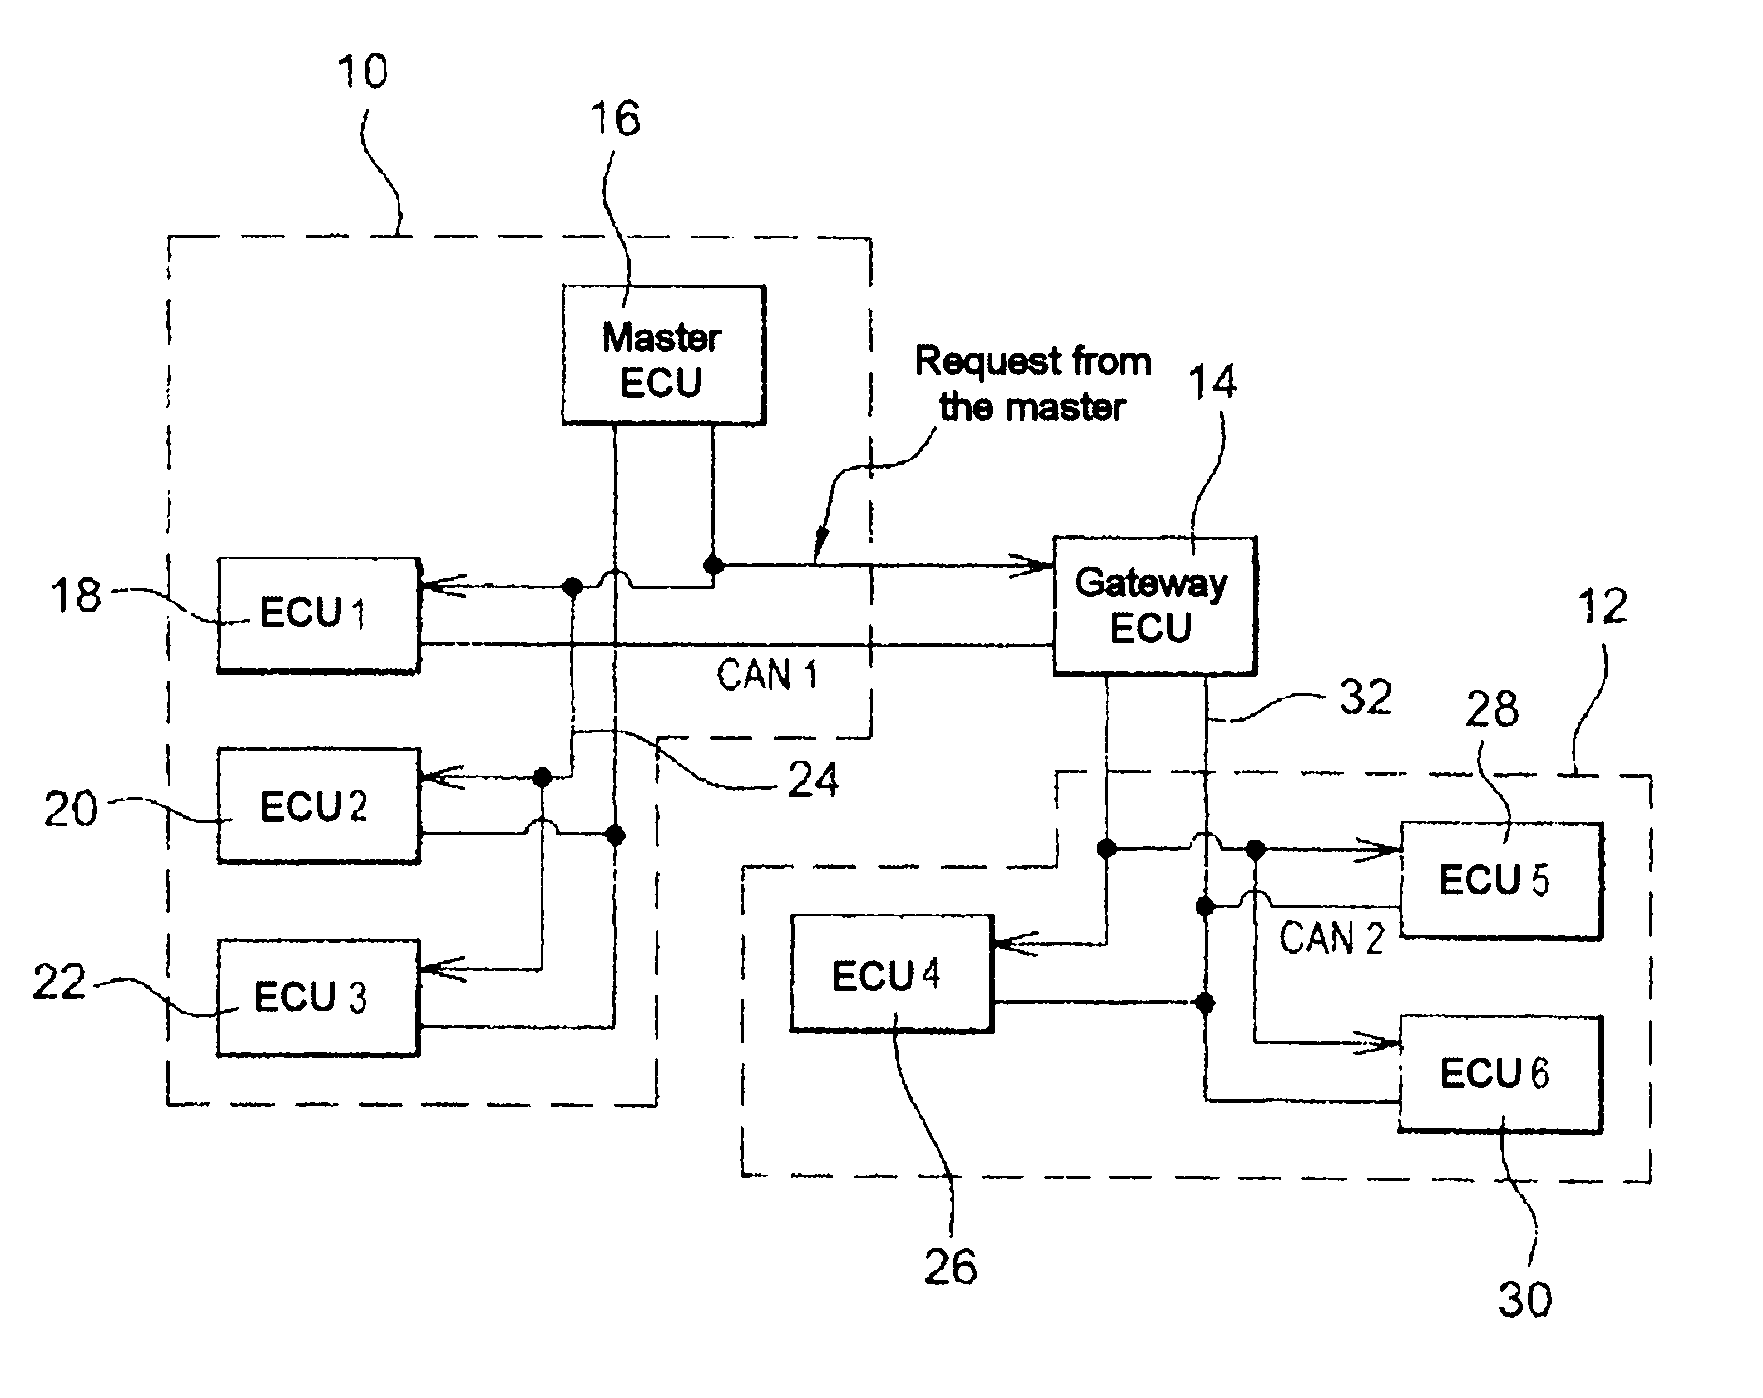 System for managing wakeup and sleep events of computers connected to a motor vehicle CAN network